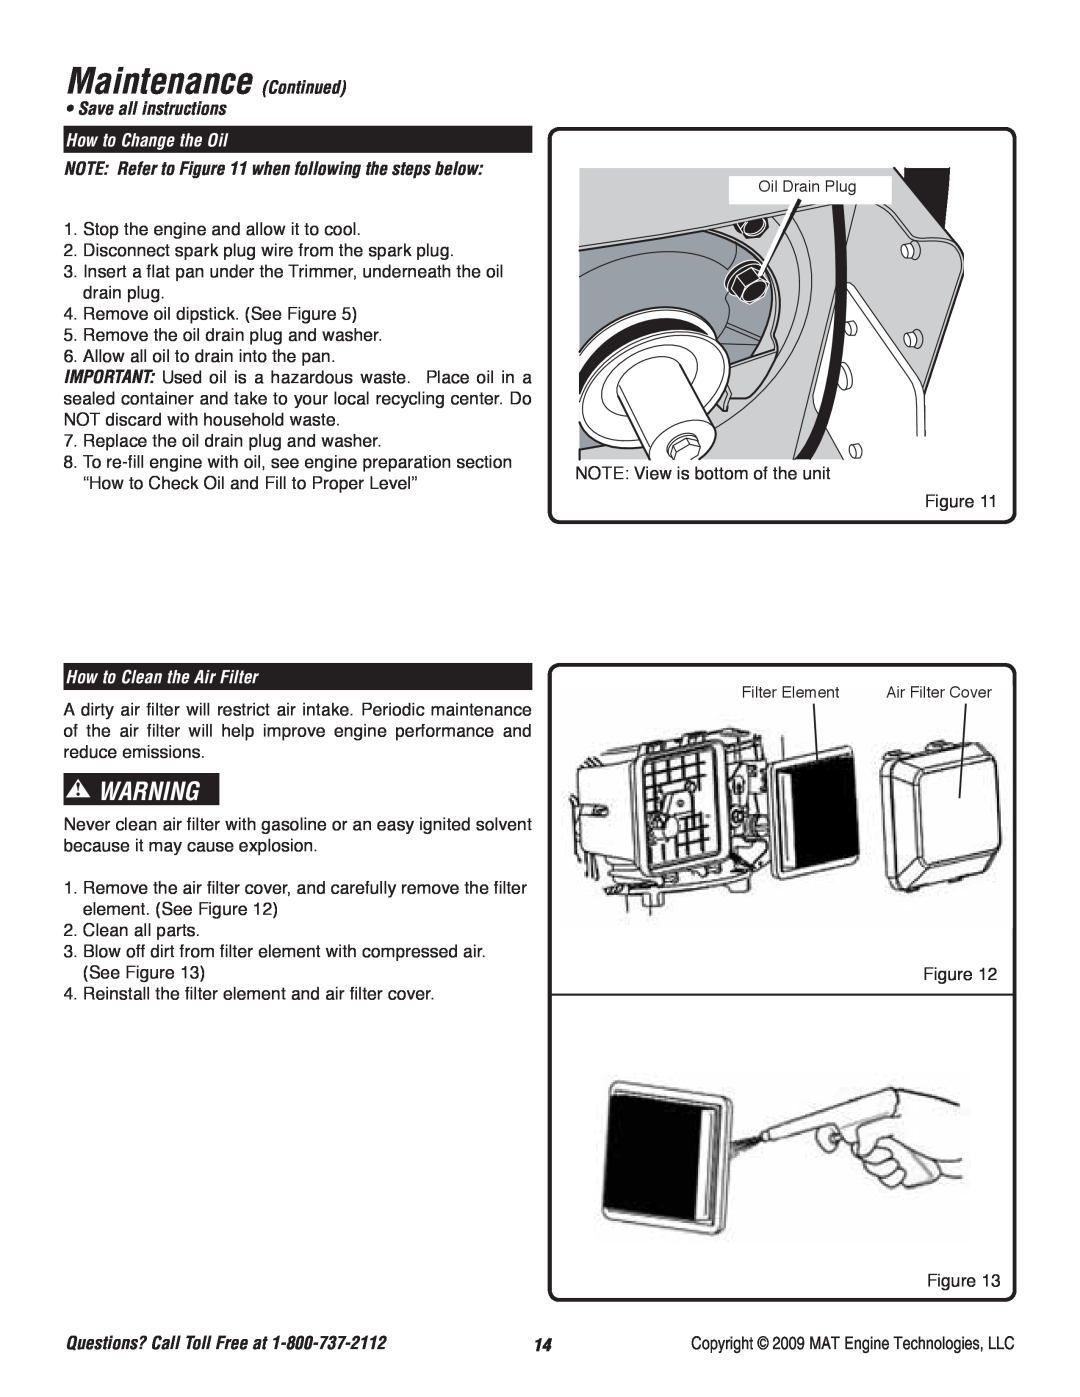 Powermate P-WFT-16022 Maintenance Continued, Save all instructions, How to Change the Oil, How to Clean the Air Filter 